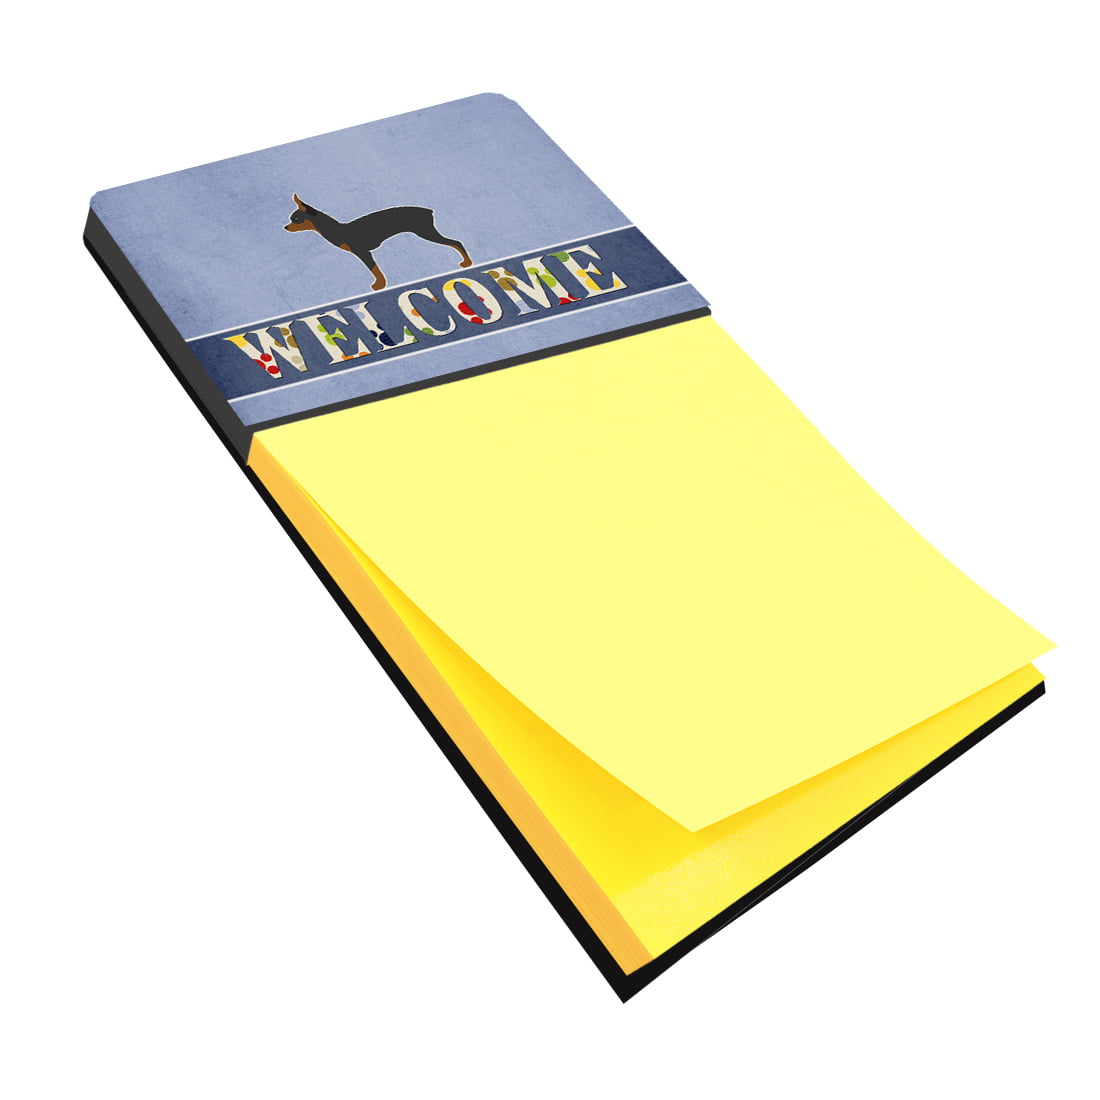 Bb5491sn Toy Fox Terrier Welcome Sticky Note Holder